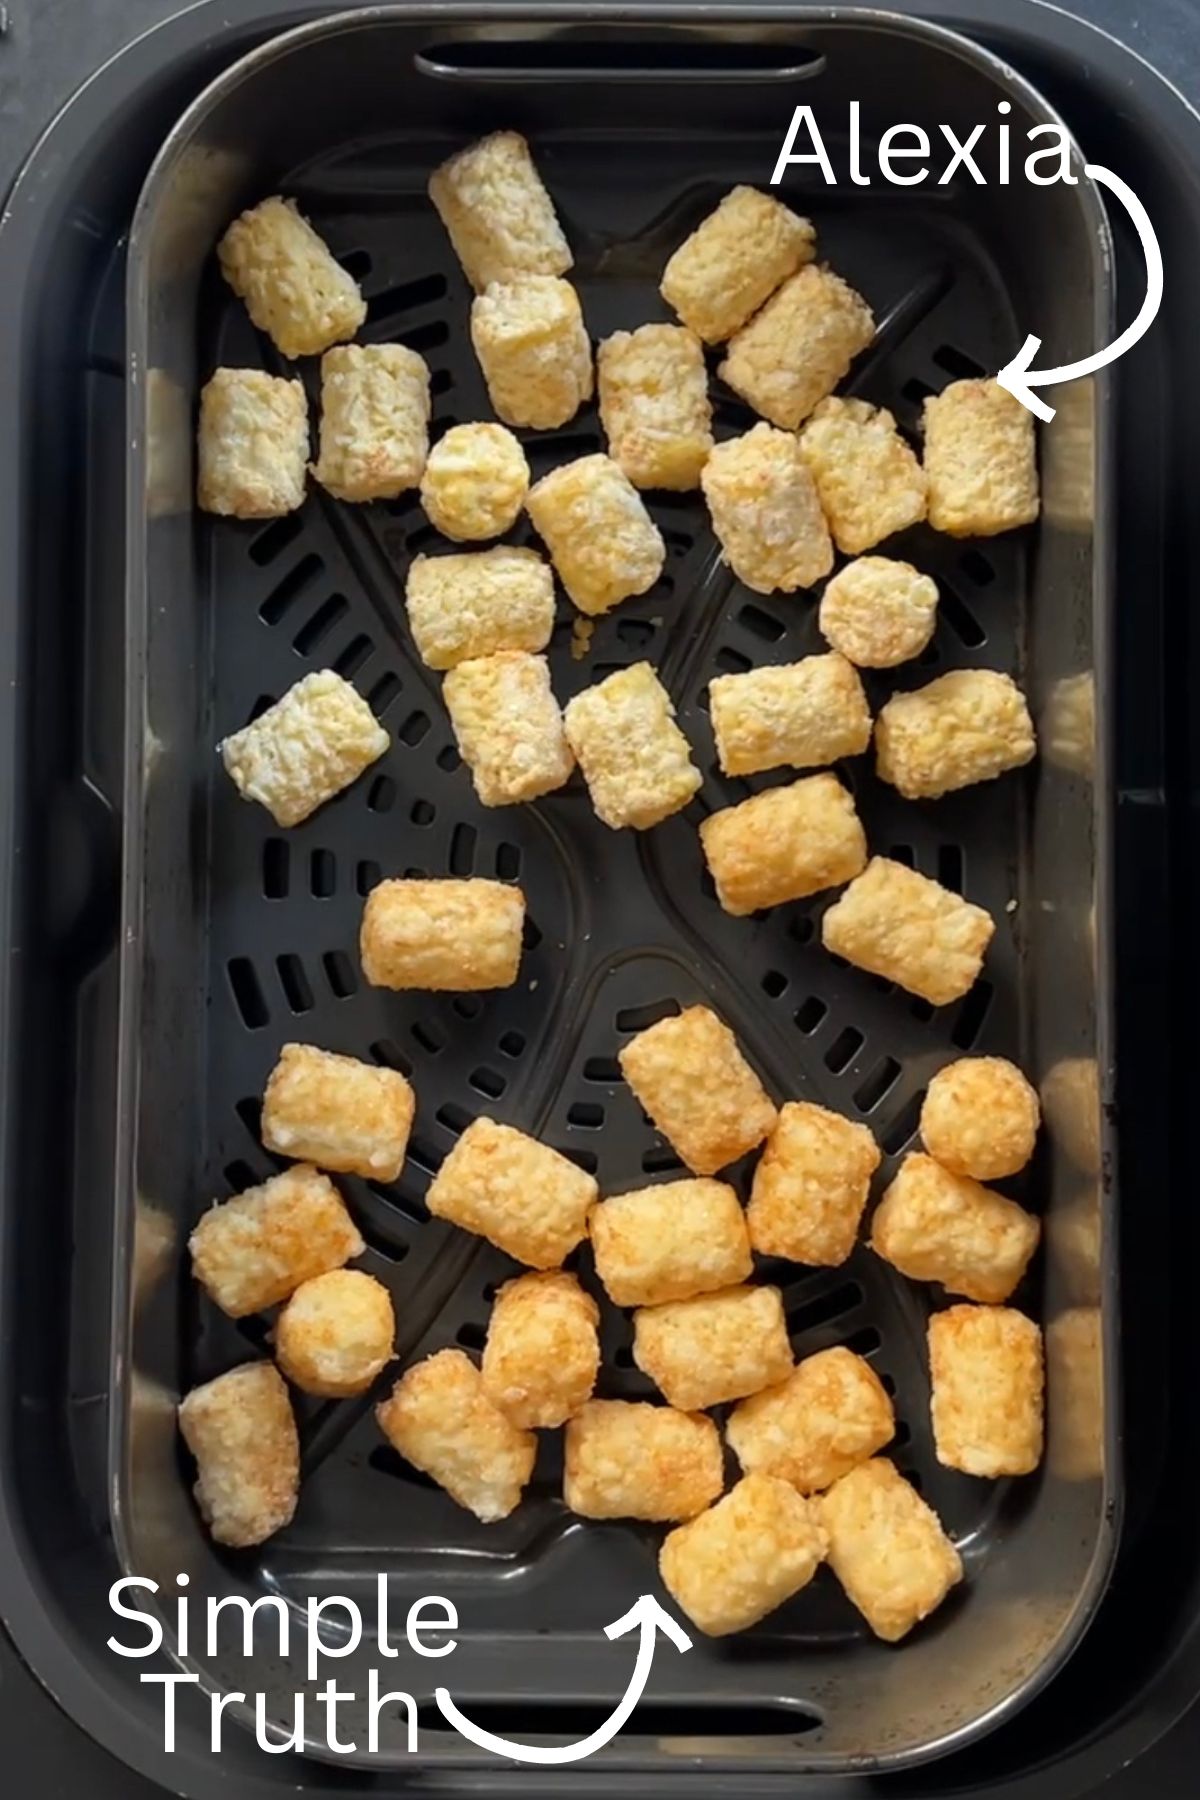 Frozen potato puffs in an air fryer basket labeled with the text "Alexia" and Simple Truth."